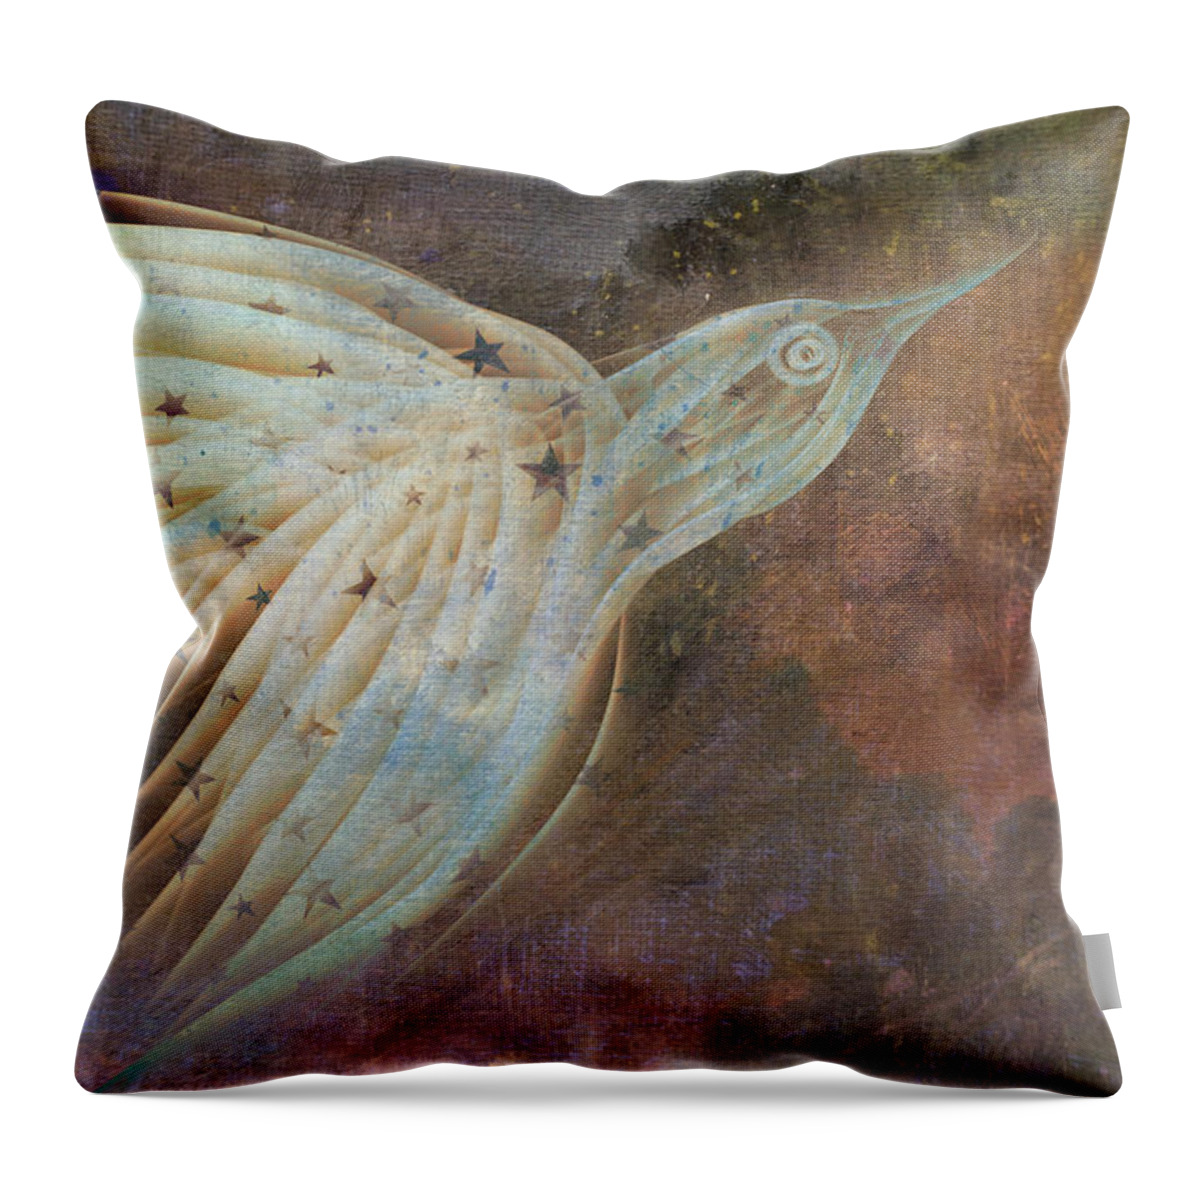 Flying Bird Throw Pillow featuring the digital art Flying Dreams by Peggy Collins